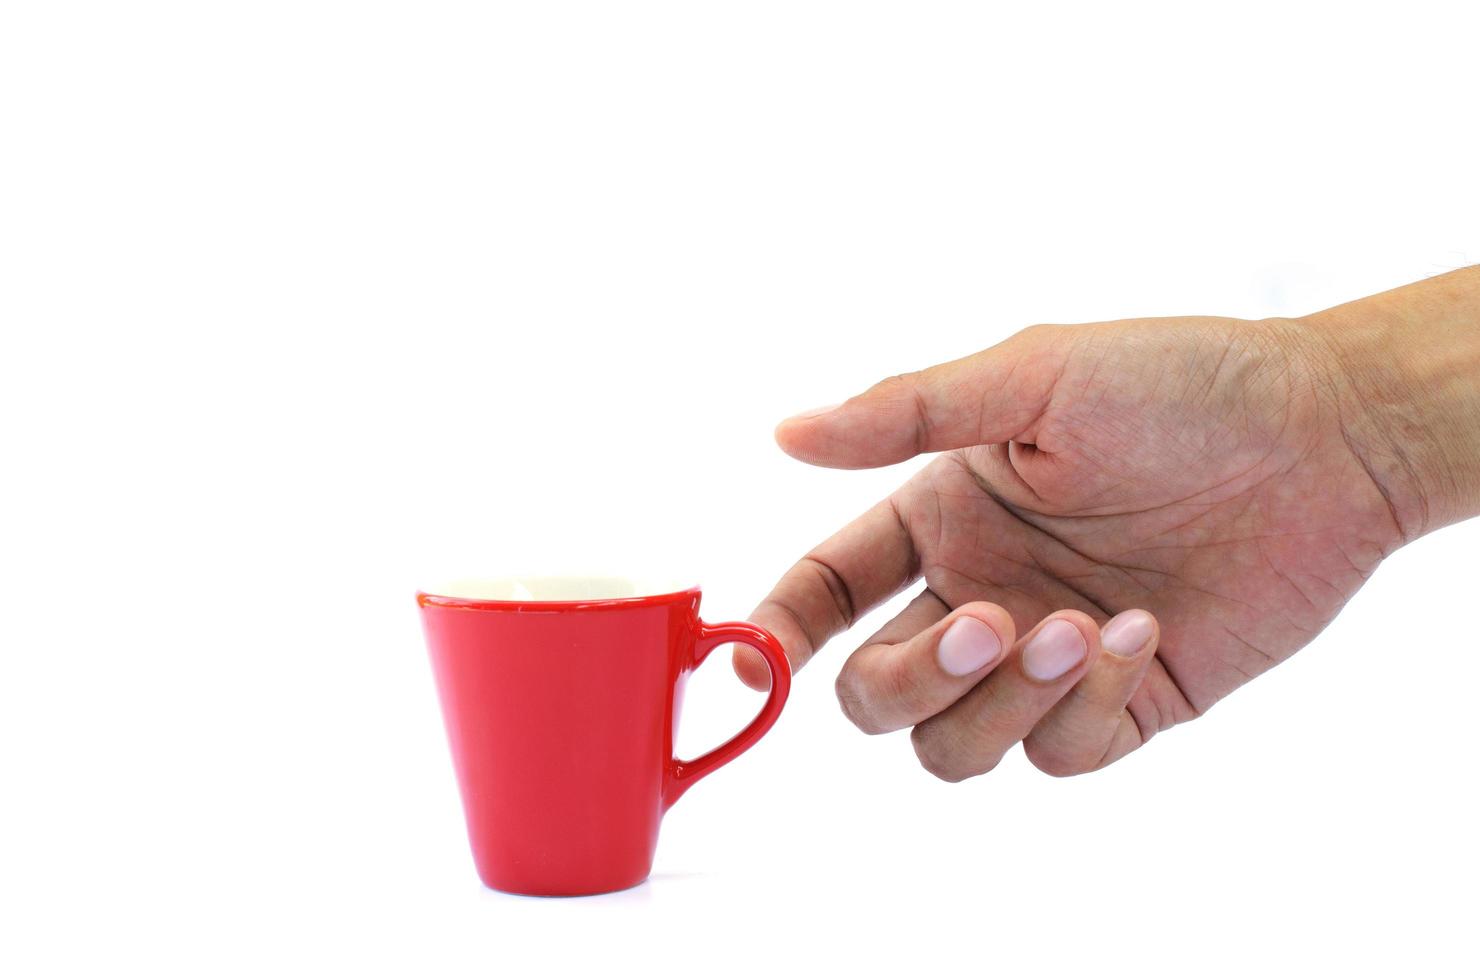 Hand holding small red cup on white background photo